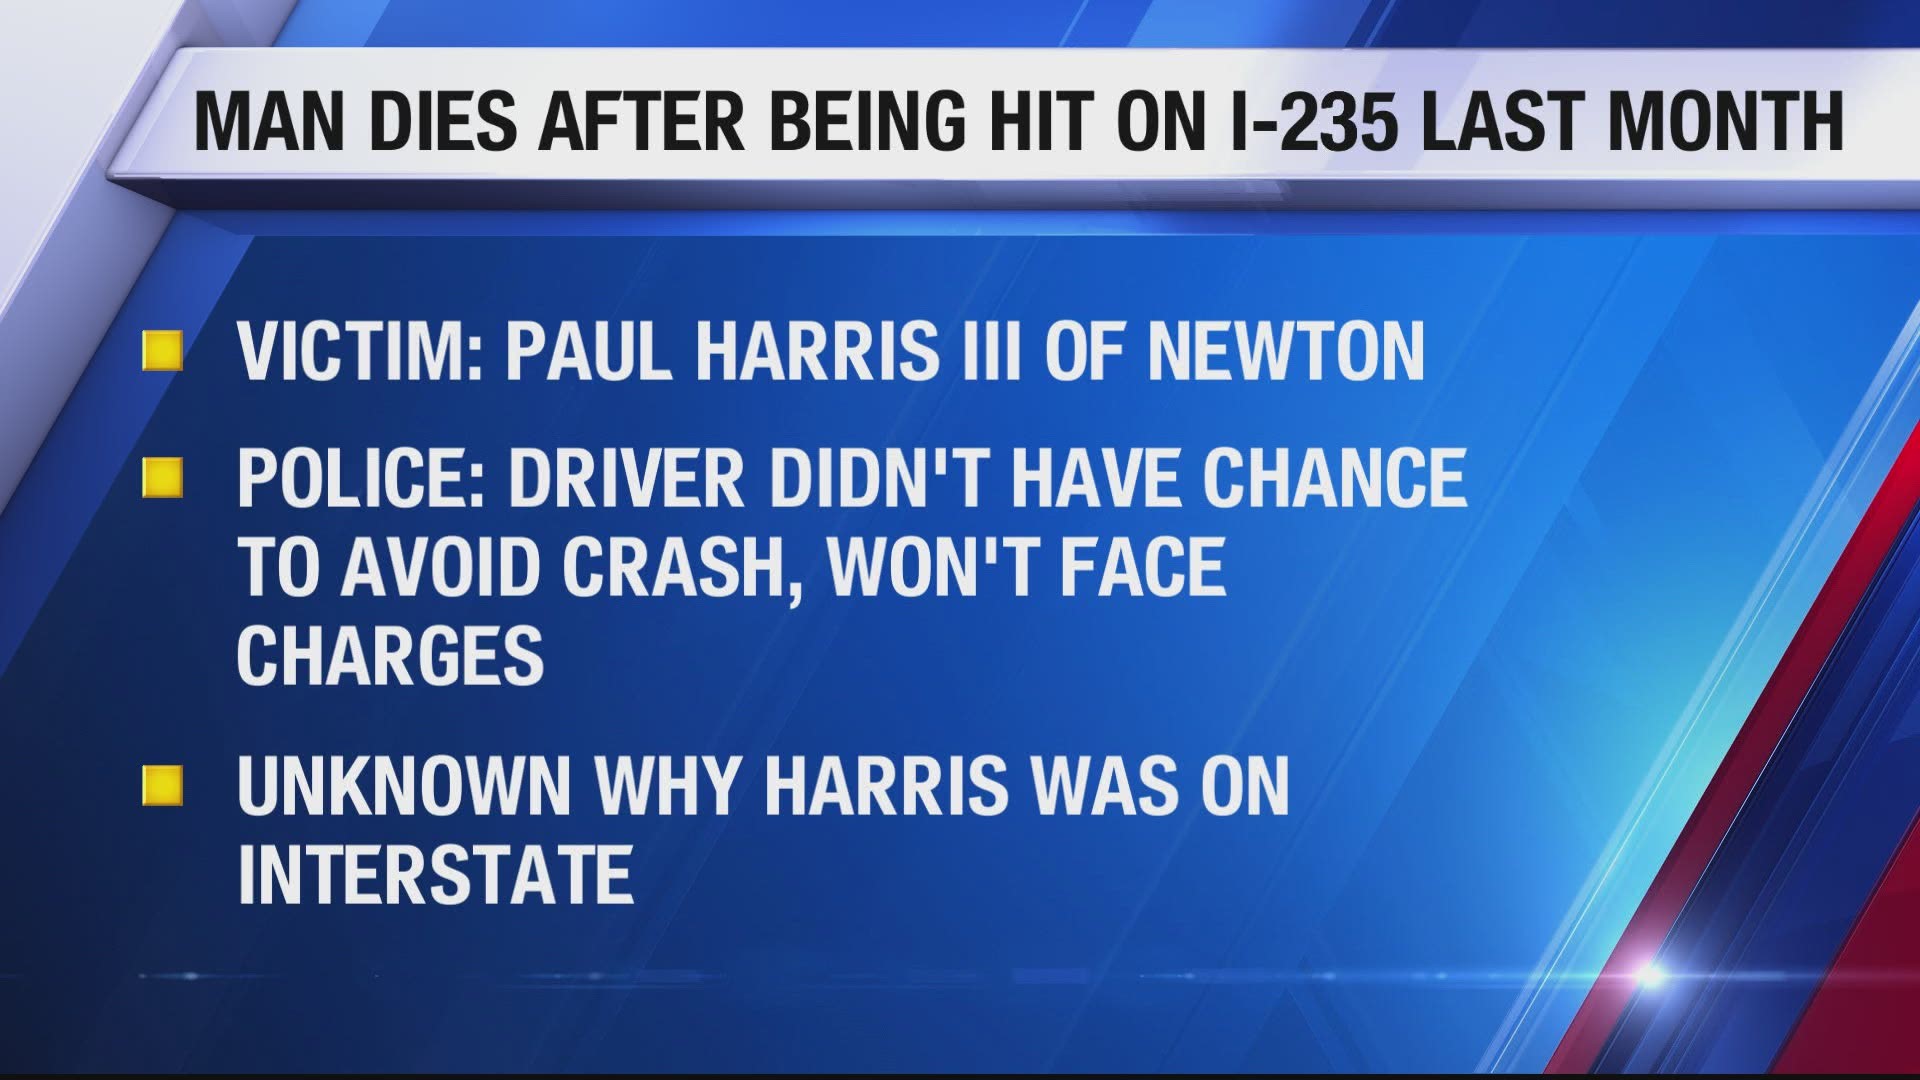 The victim was identified as Newton-native Paul Harris III. Police say the driver that hit Harris won't face charges, as they couldn't avoid running into him.